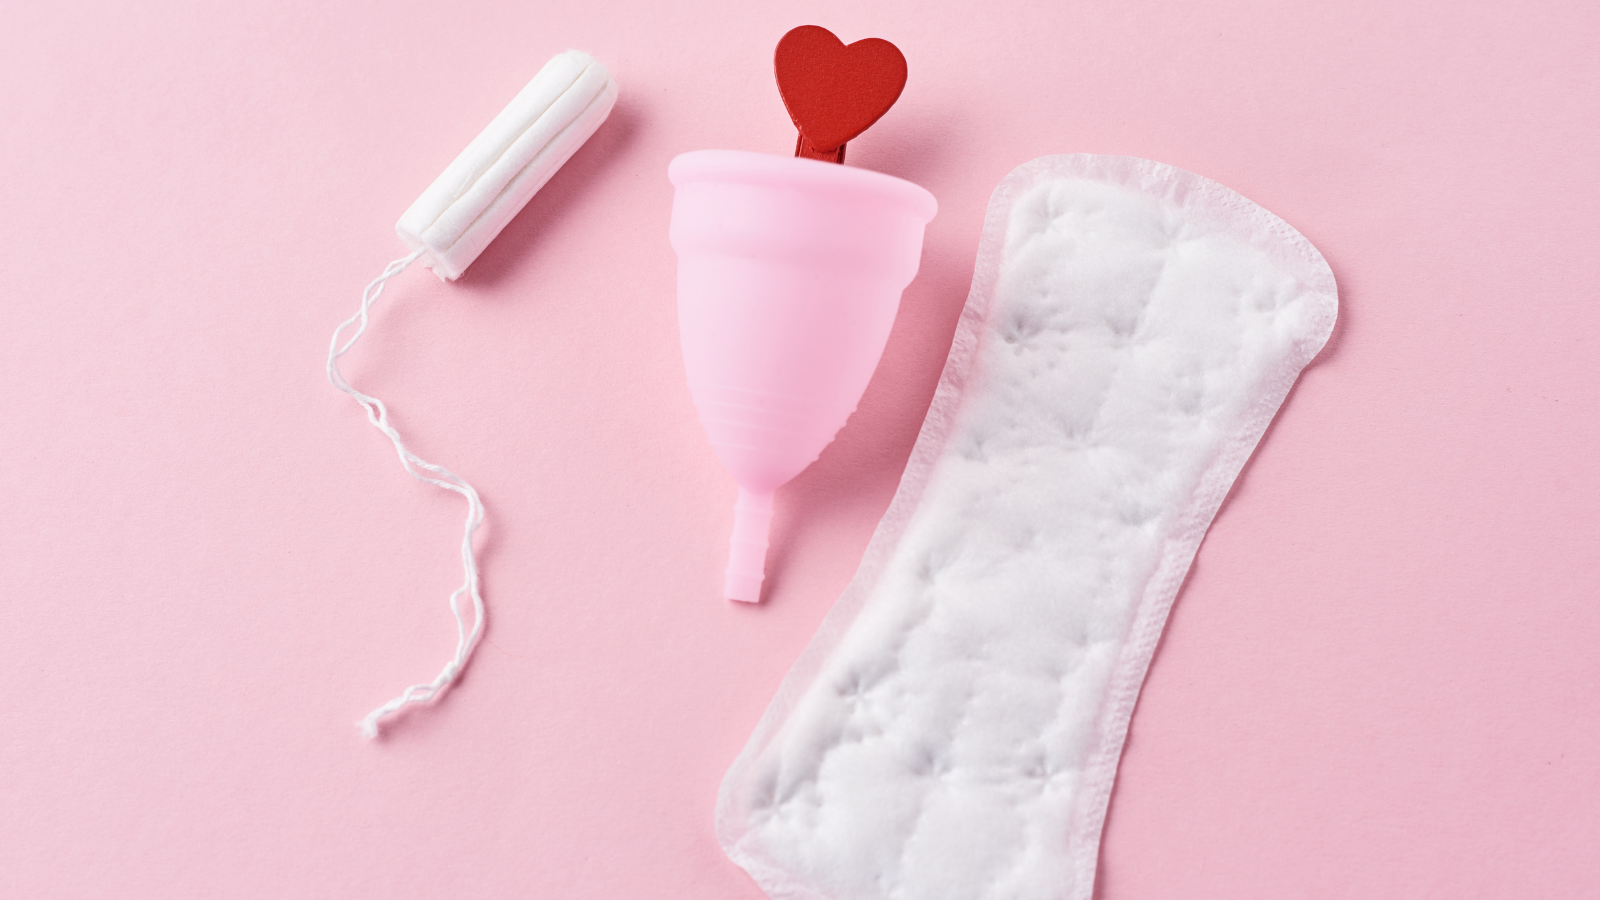 tampon. menstrual cup and pad